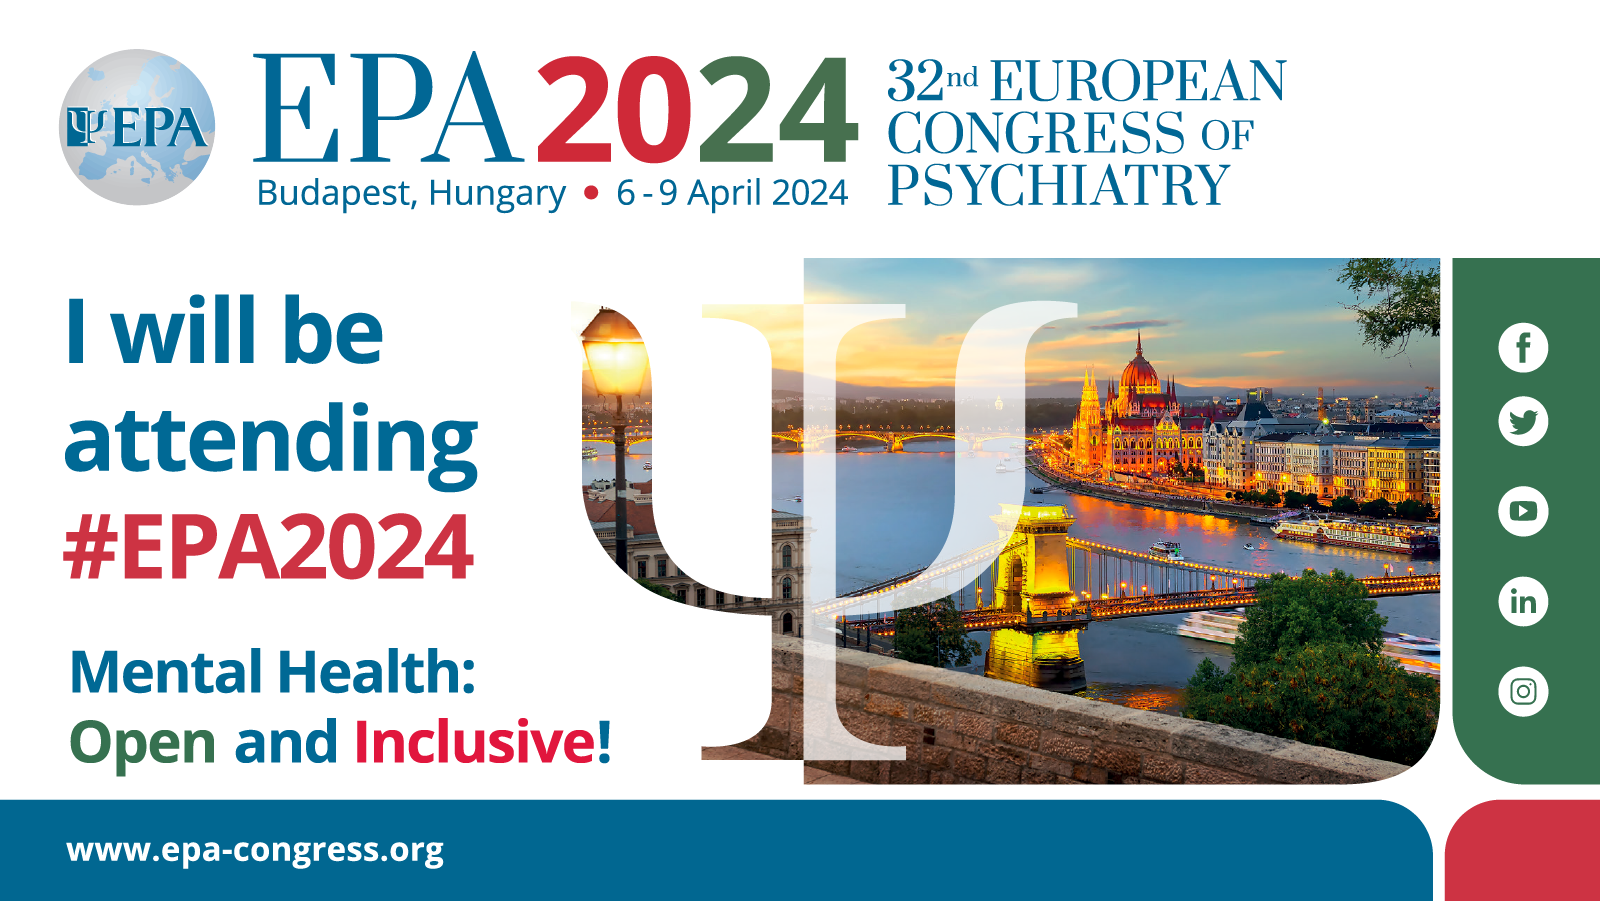 EPA 2024 Congress - Social Toolkit - I will be attending - 1600x900px: EPA2024 Budapest, Hungary. 6 -9 April 2024. 32nd european congress of psychiatry. Mental Health: Open and Inclusive! #EPA2024